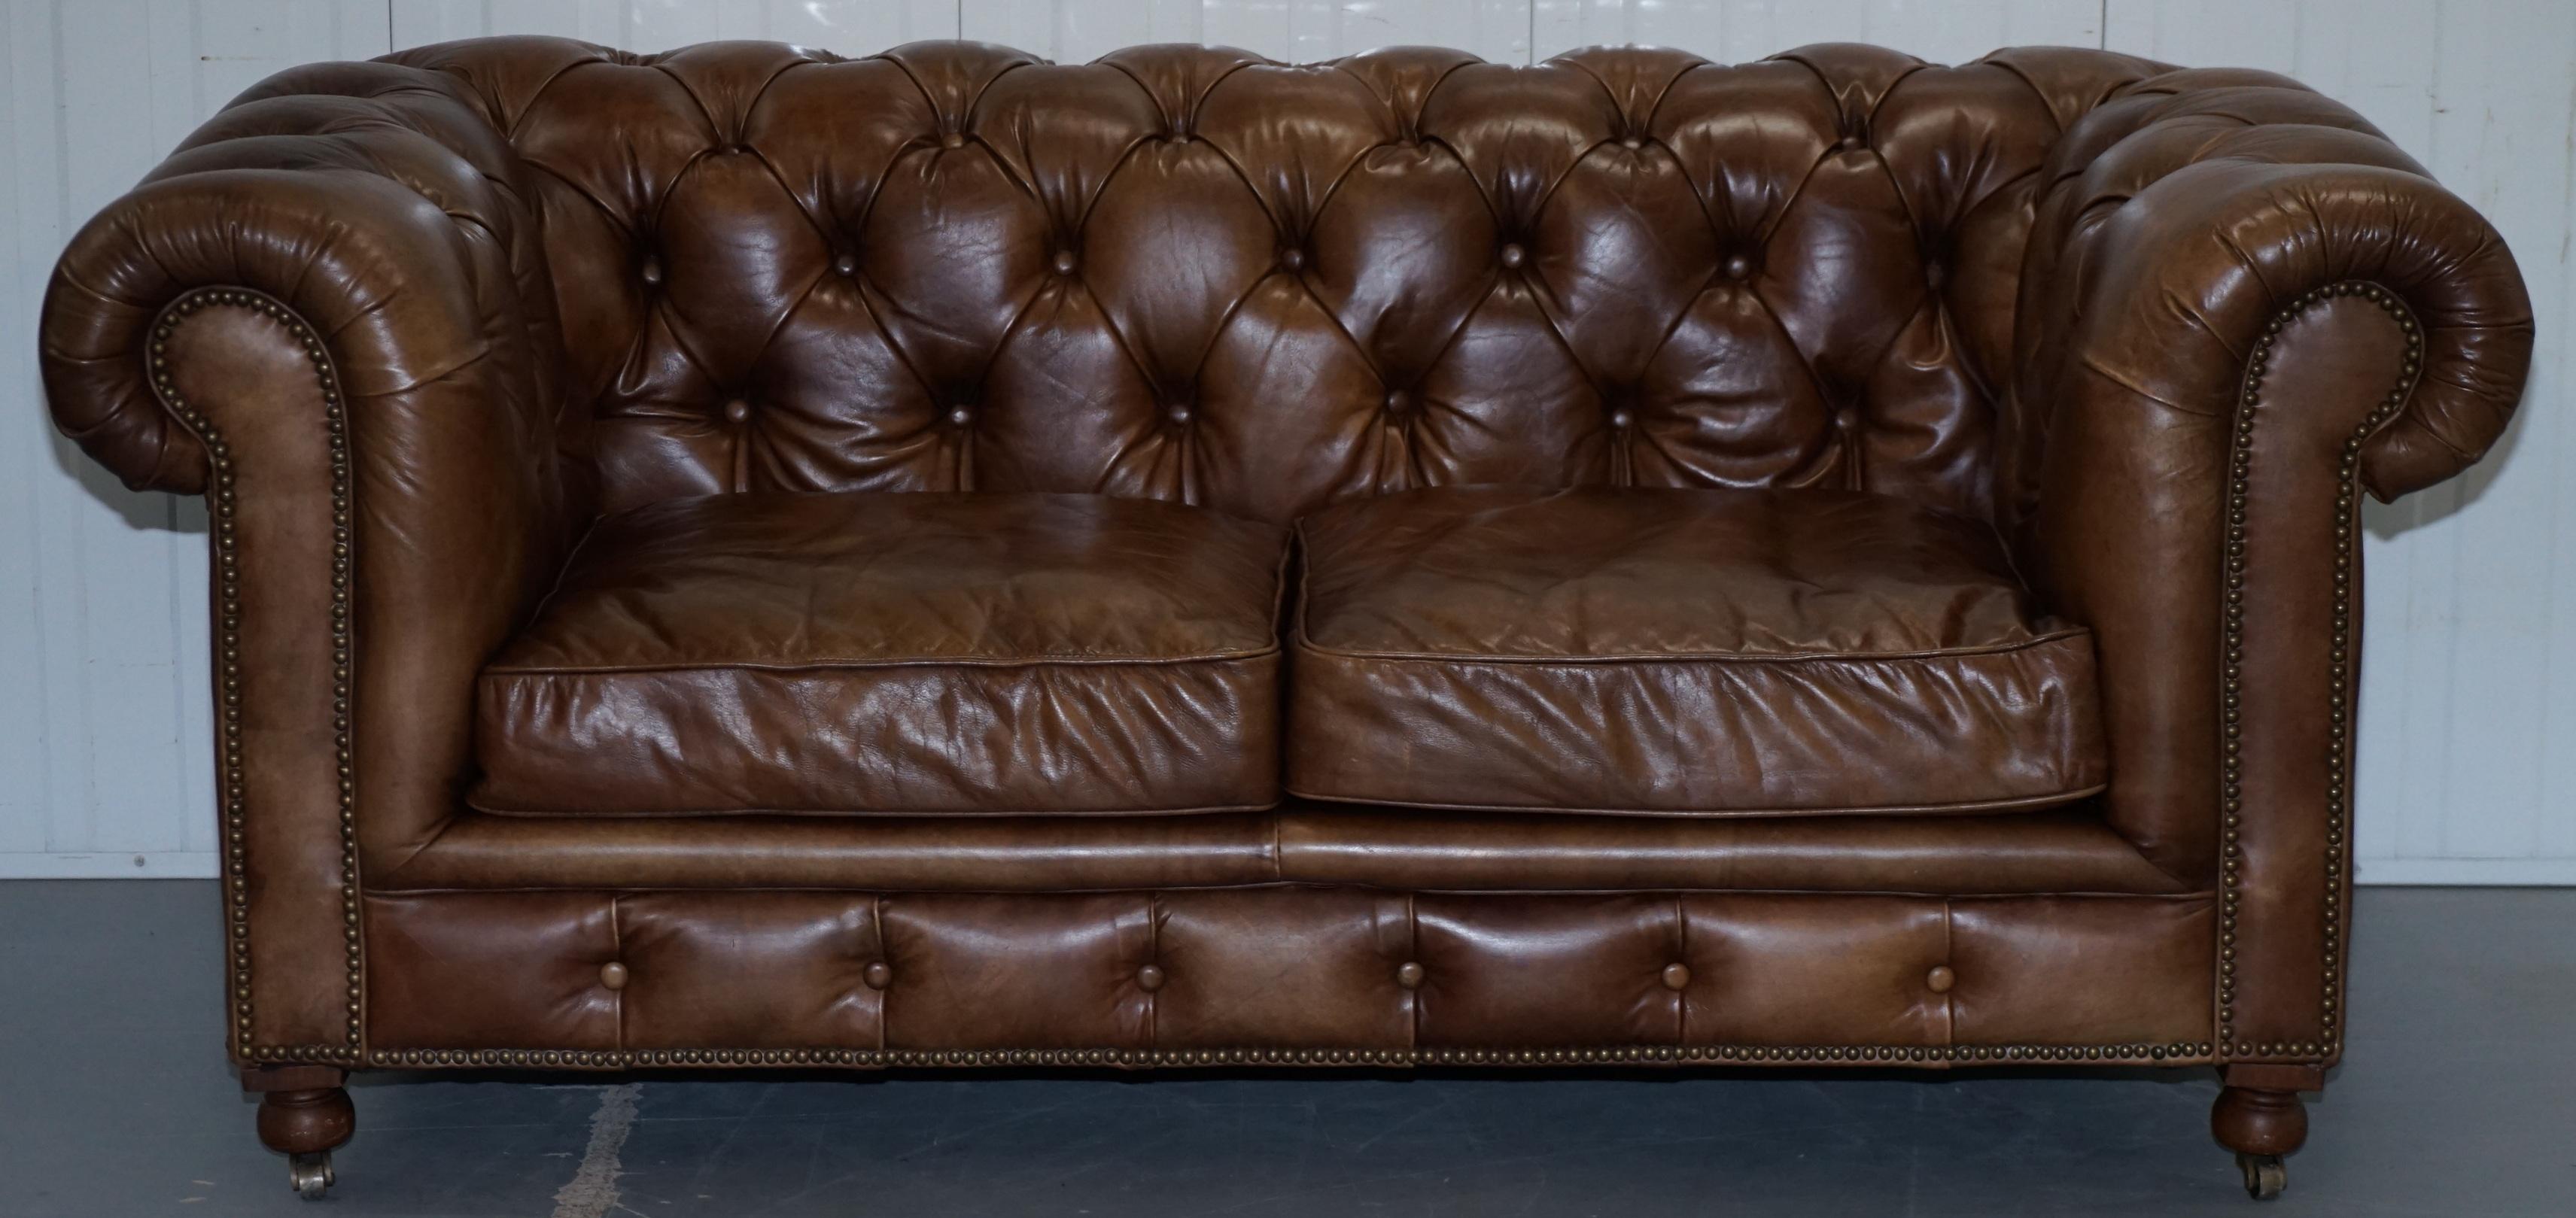 We are delighted to offer for sale one of two very nice Timothy Oulton Halo Westminster aged brown leather Chesterfield sofas RRP £3839 each

This auction is for one, the other is listed under my other items, I also have the matching three-seat